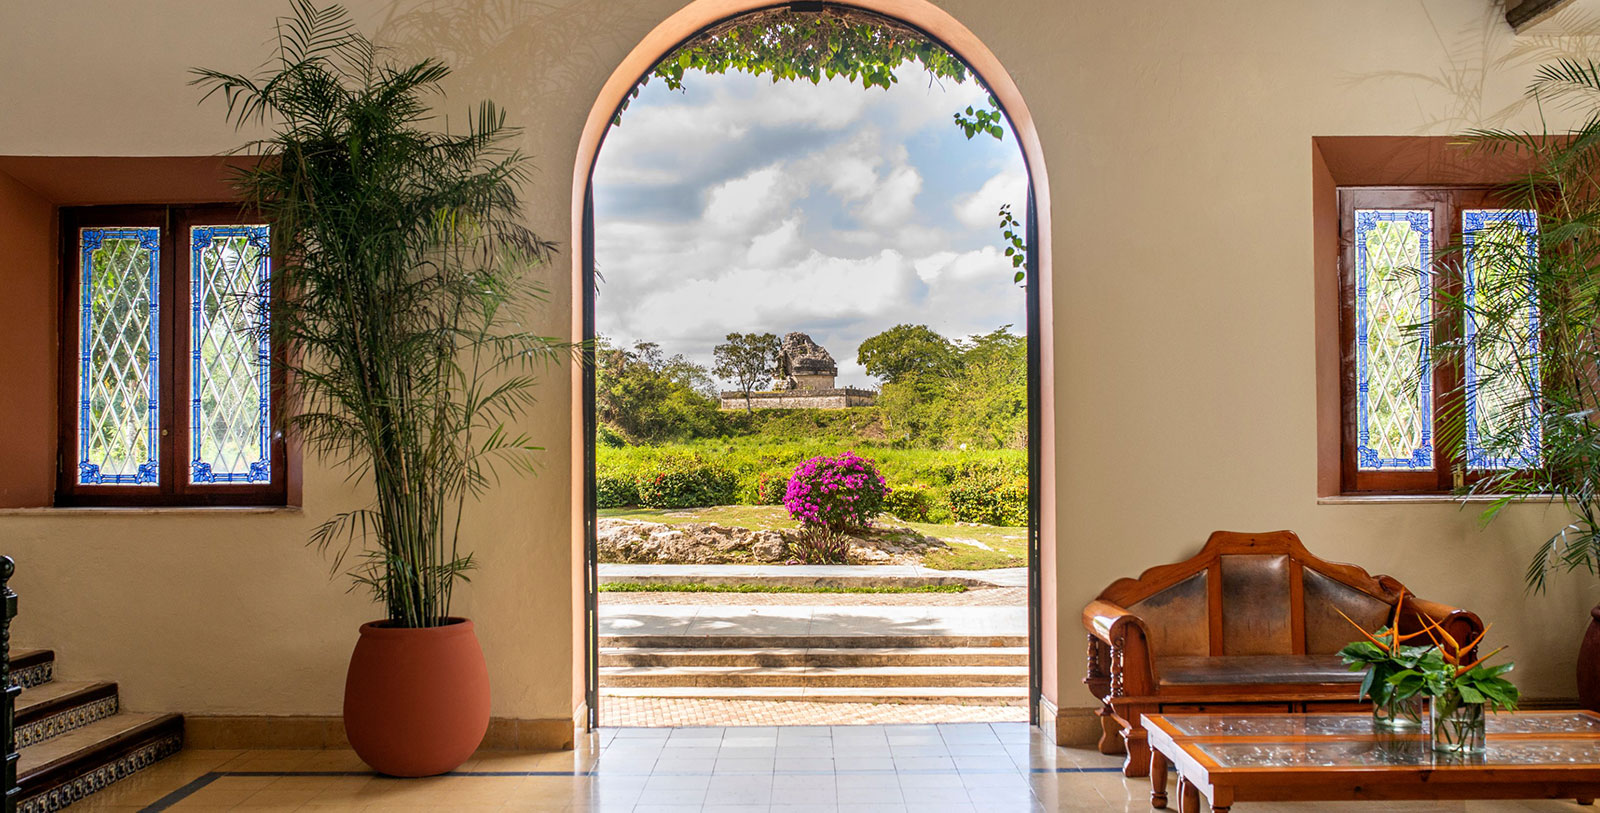 Discover the Spanish Colonial architecture of this vacation retreat.